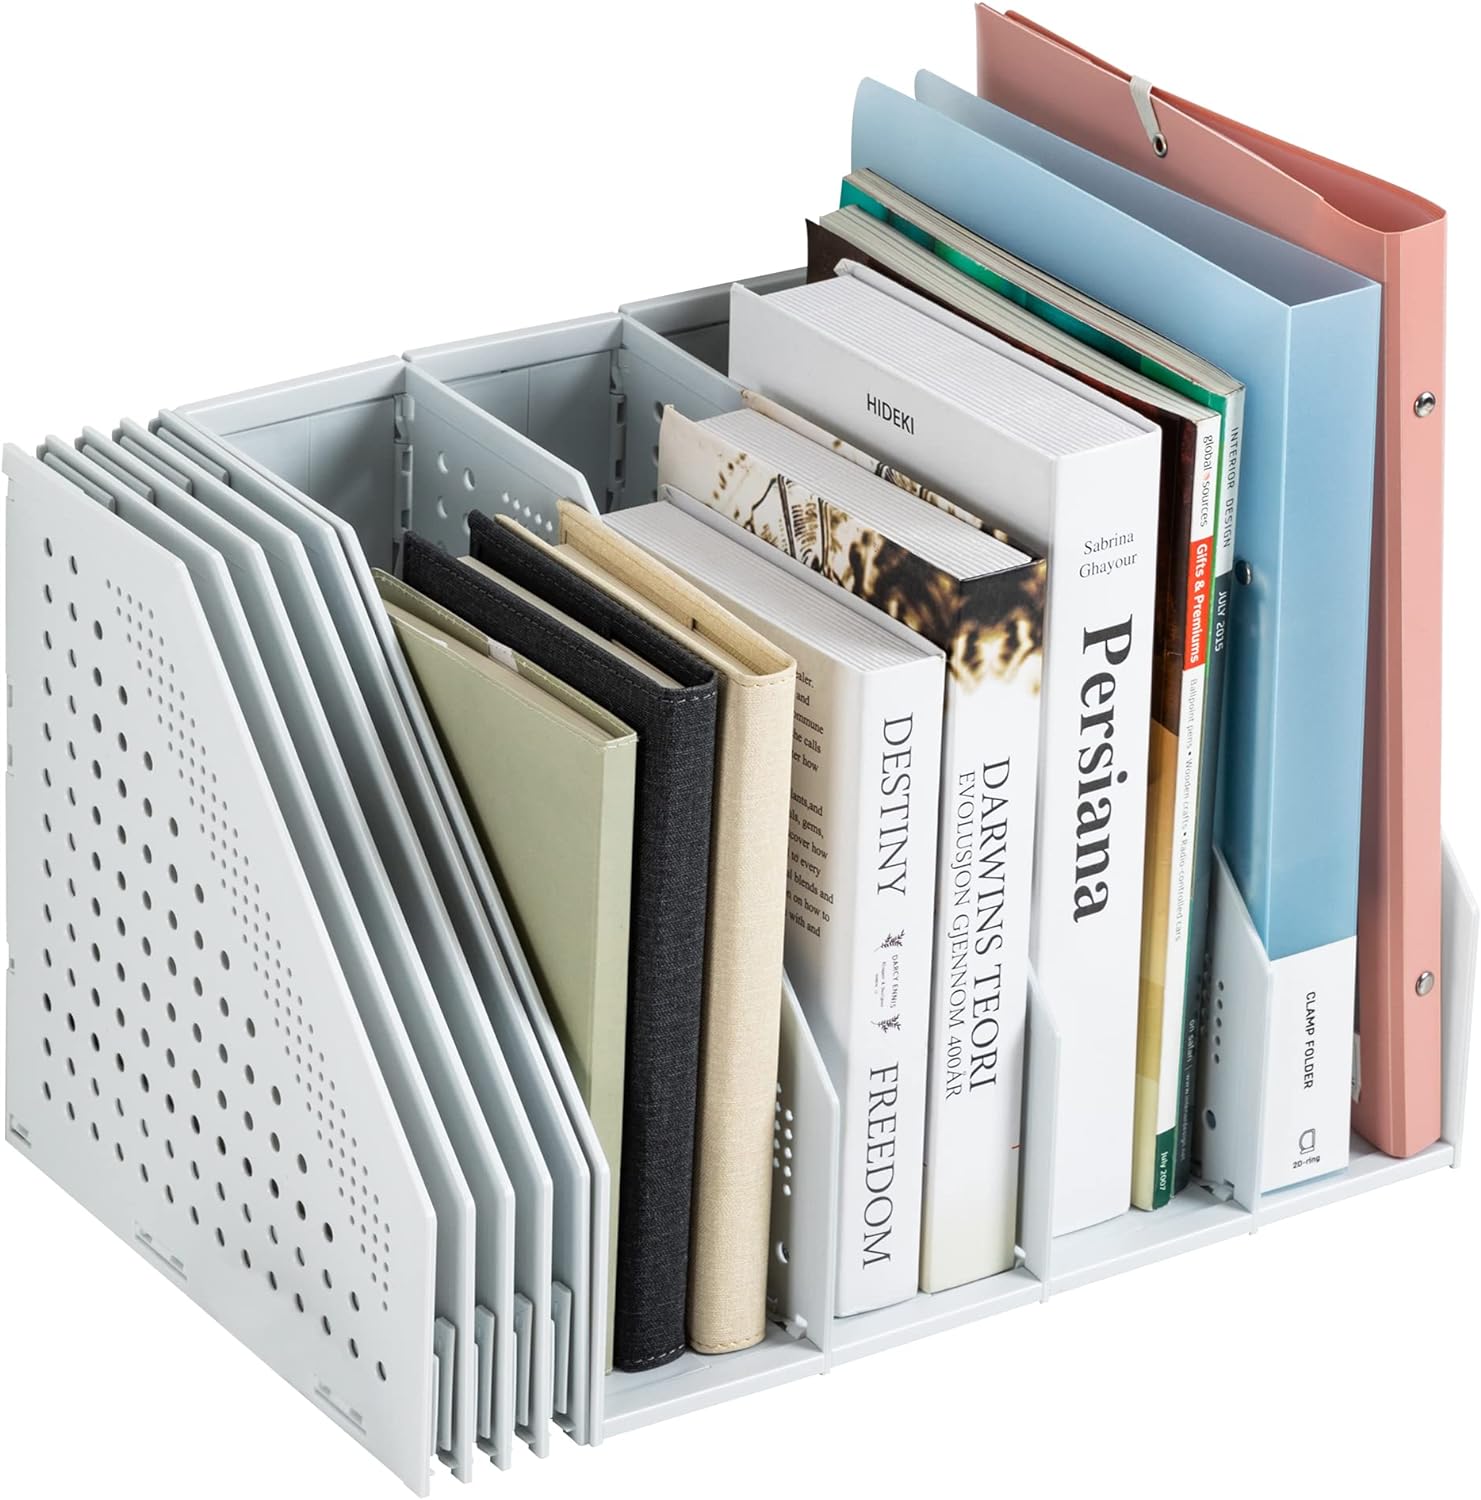 Deli Collapsible Magazine File Holder, Desk Organizer Document Folder for Office Organization and Storage, 4 Vertical Compartments, Gray